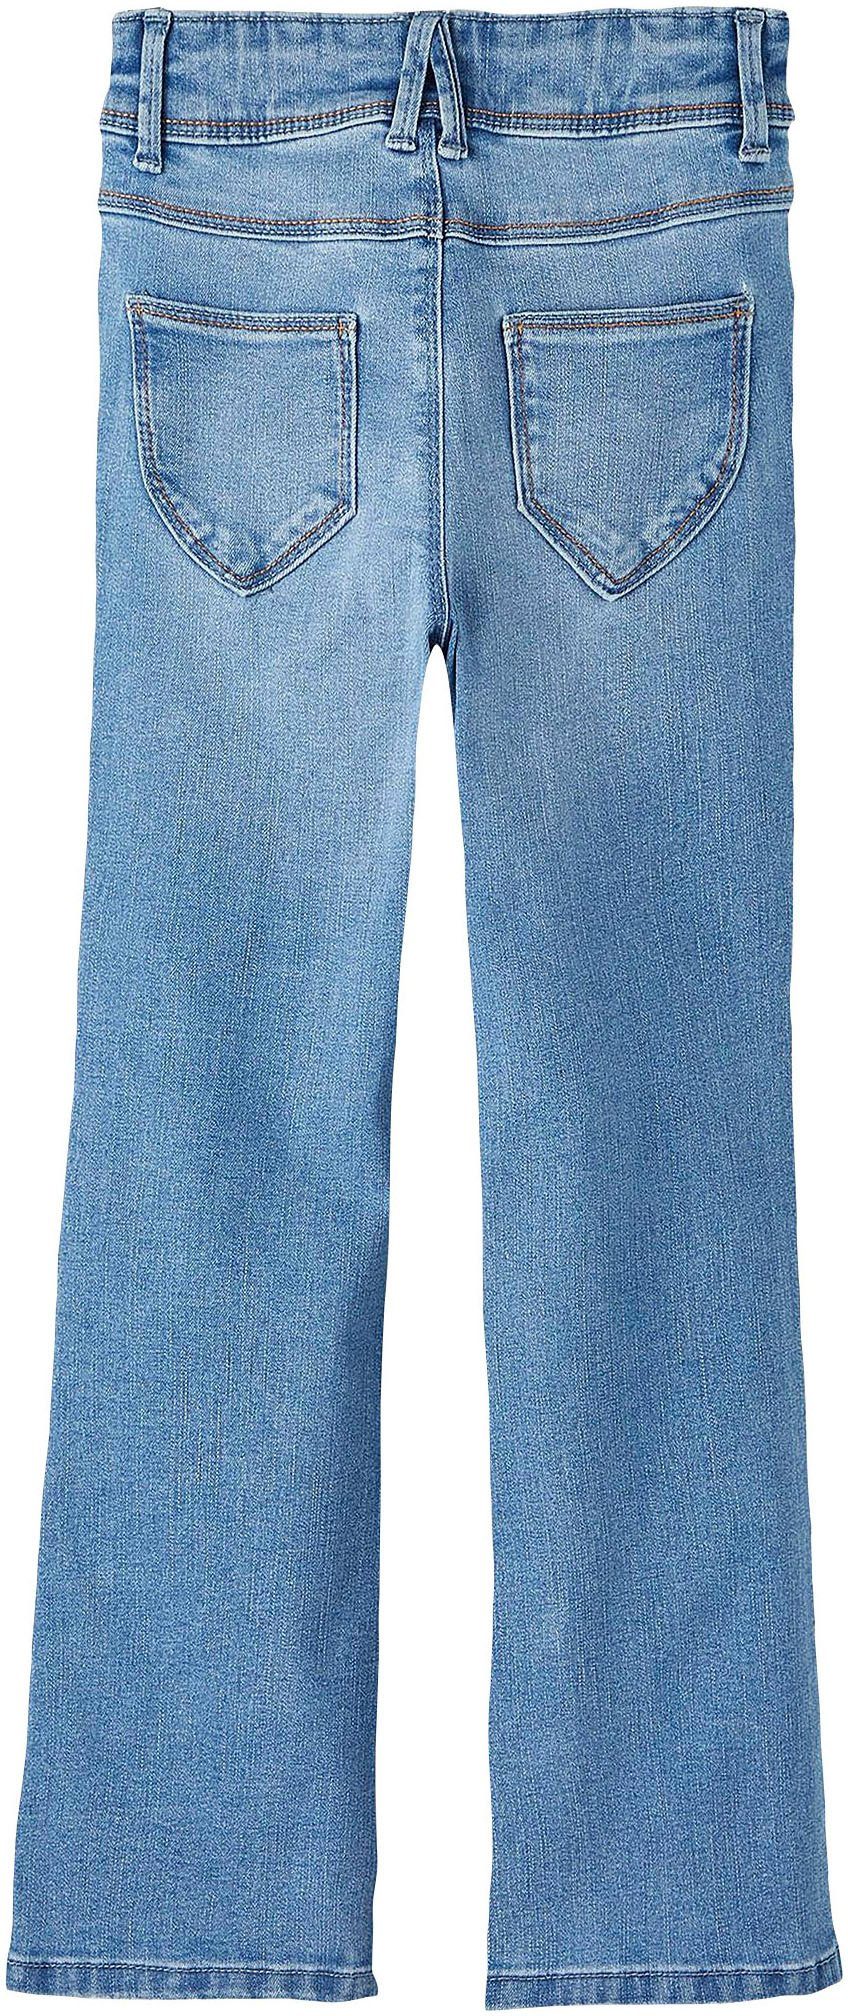 Name SKINNY JEANS Stretch blue NOOS It medium NKFPOLLY mit BOOT Bootcut-Jeans 1142-AU